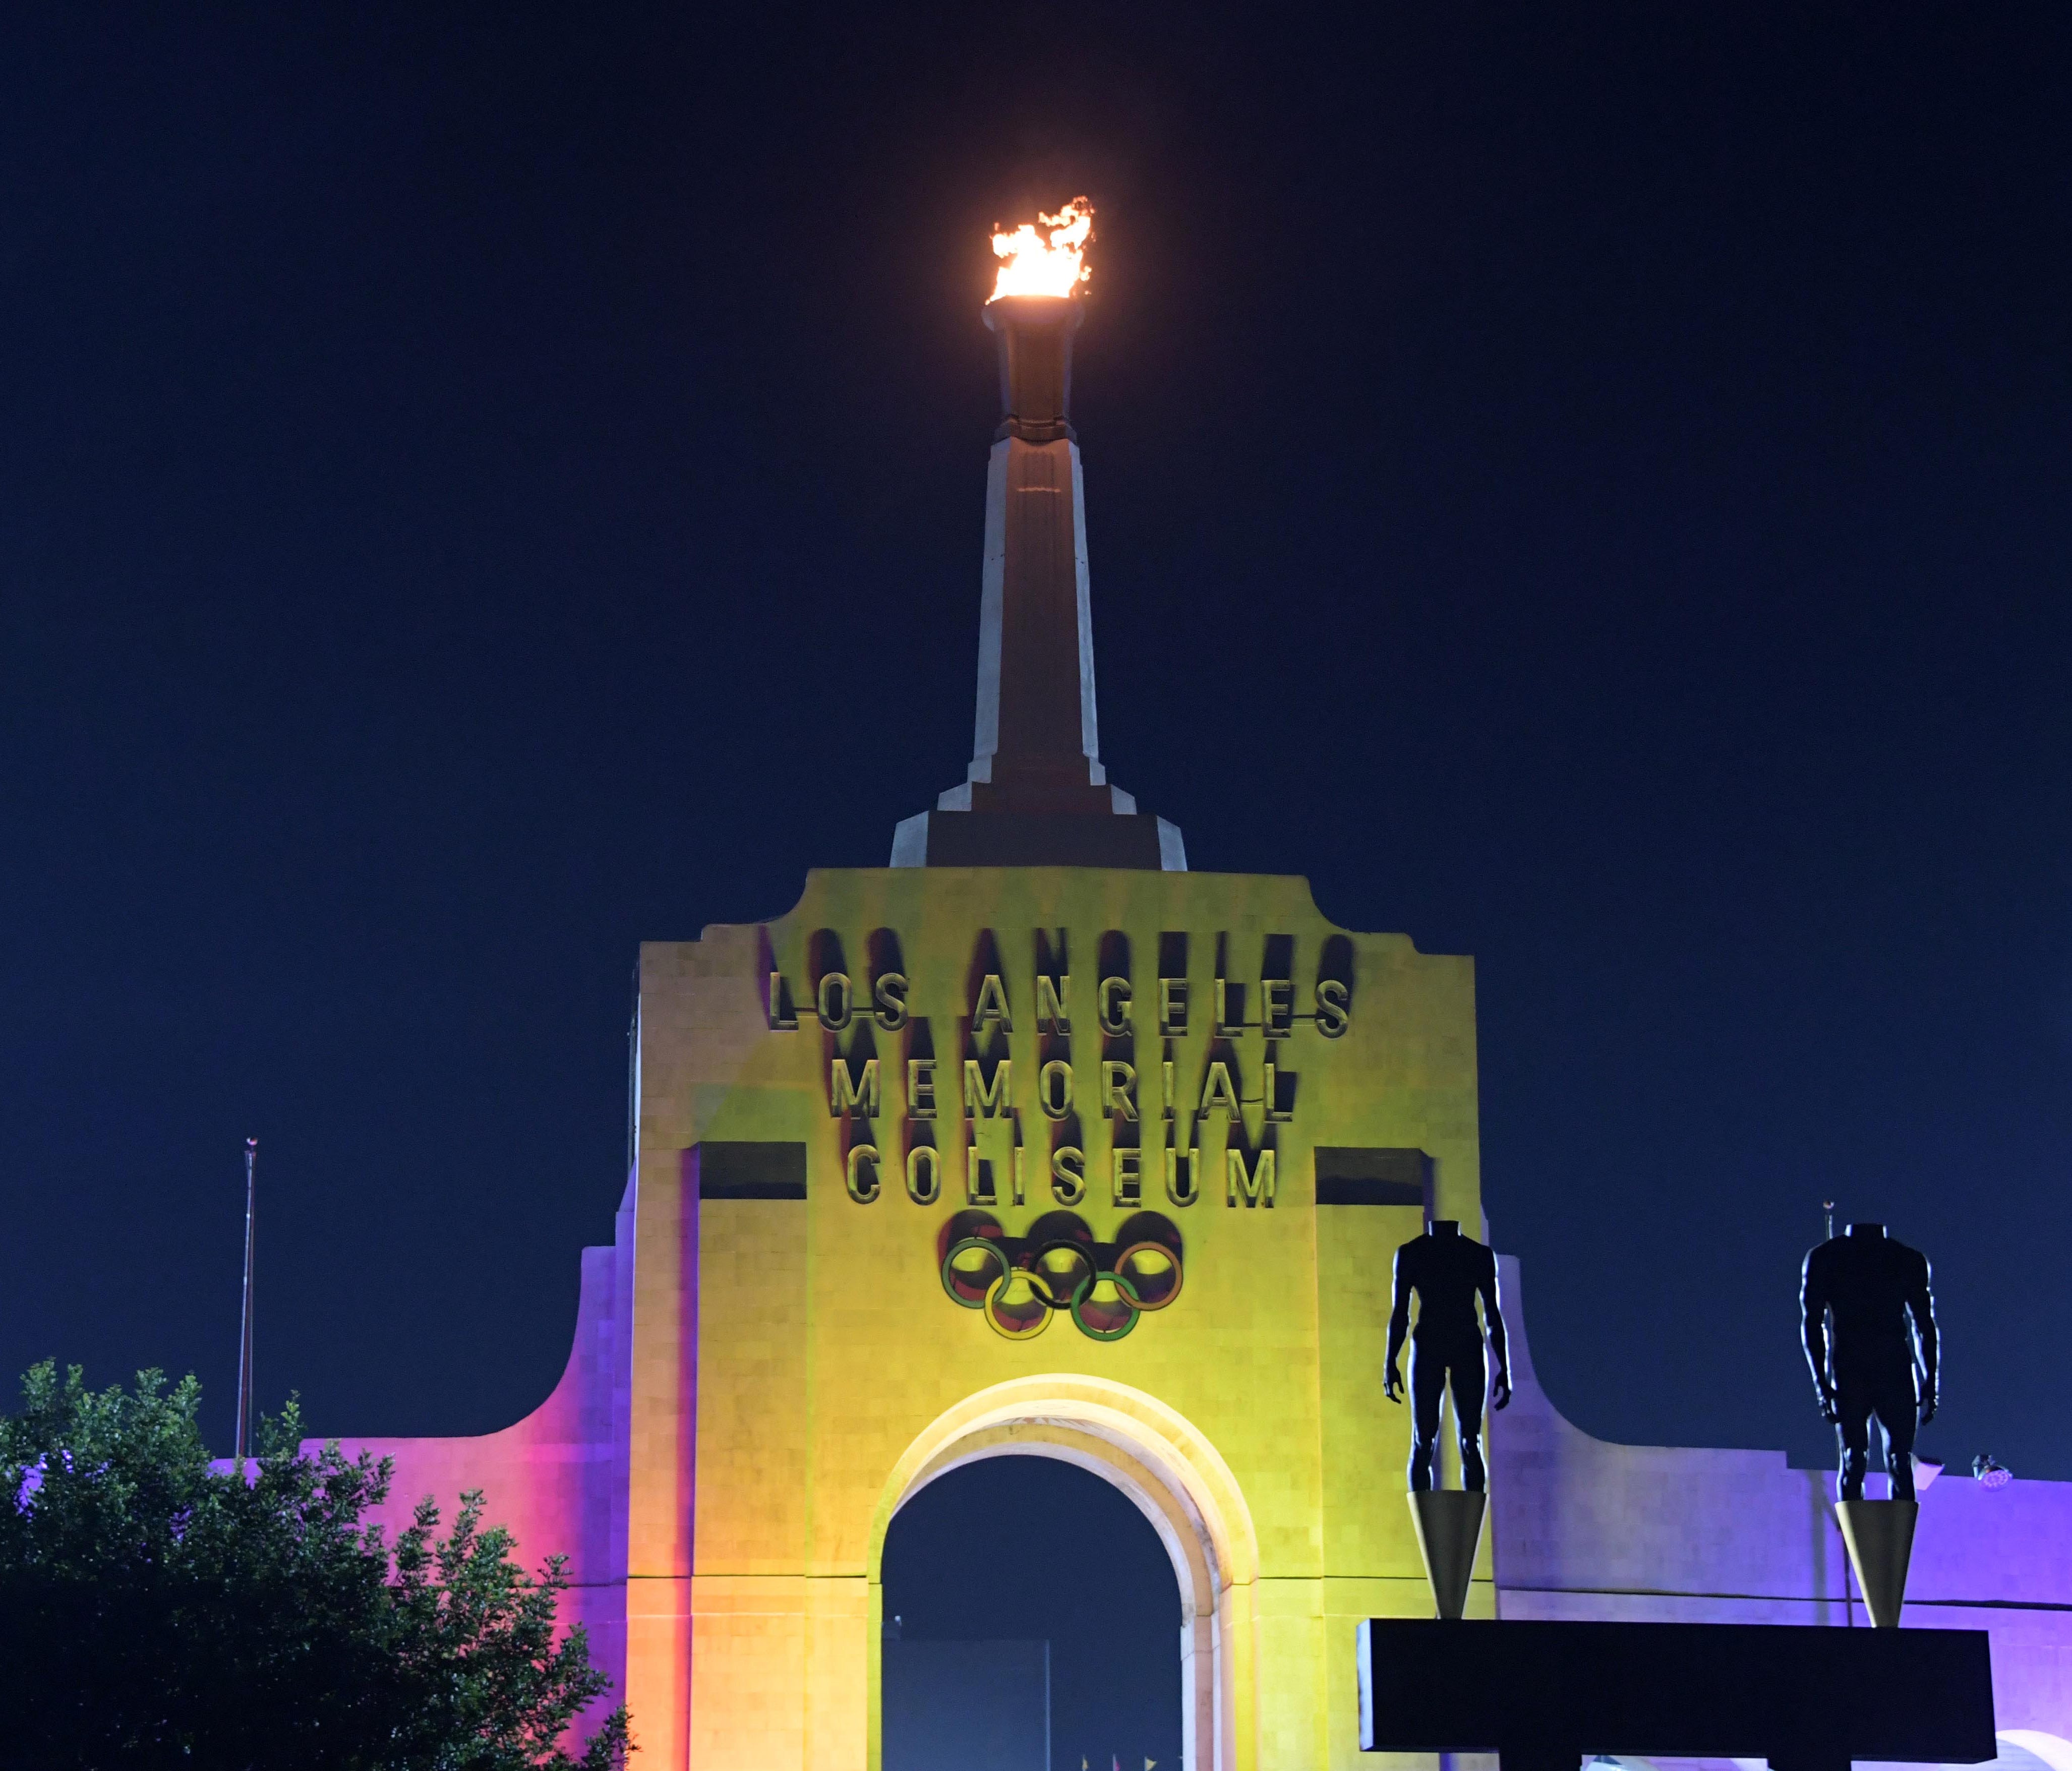 The Los Angeles Memorial Coliseum will be part of the 2028 Olympics. Here the torch is illuminated in the colors of the LA2028 logo to commemorate the awarding of the 2028 Olympics and Paralympics to Los Angeles on Sept. 12.